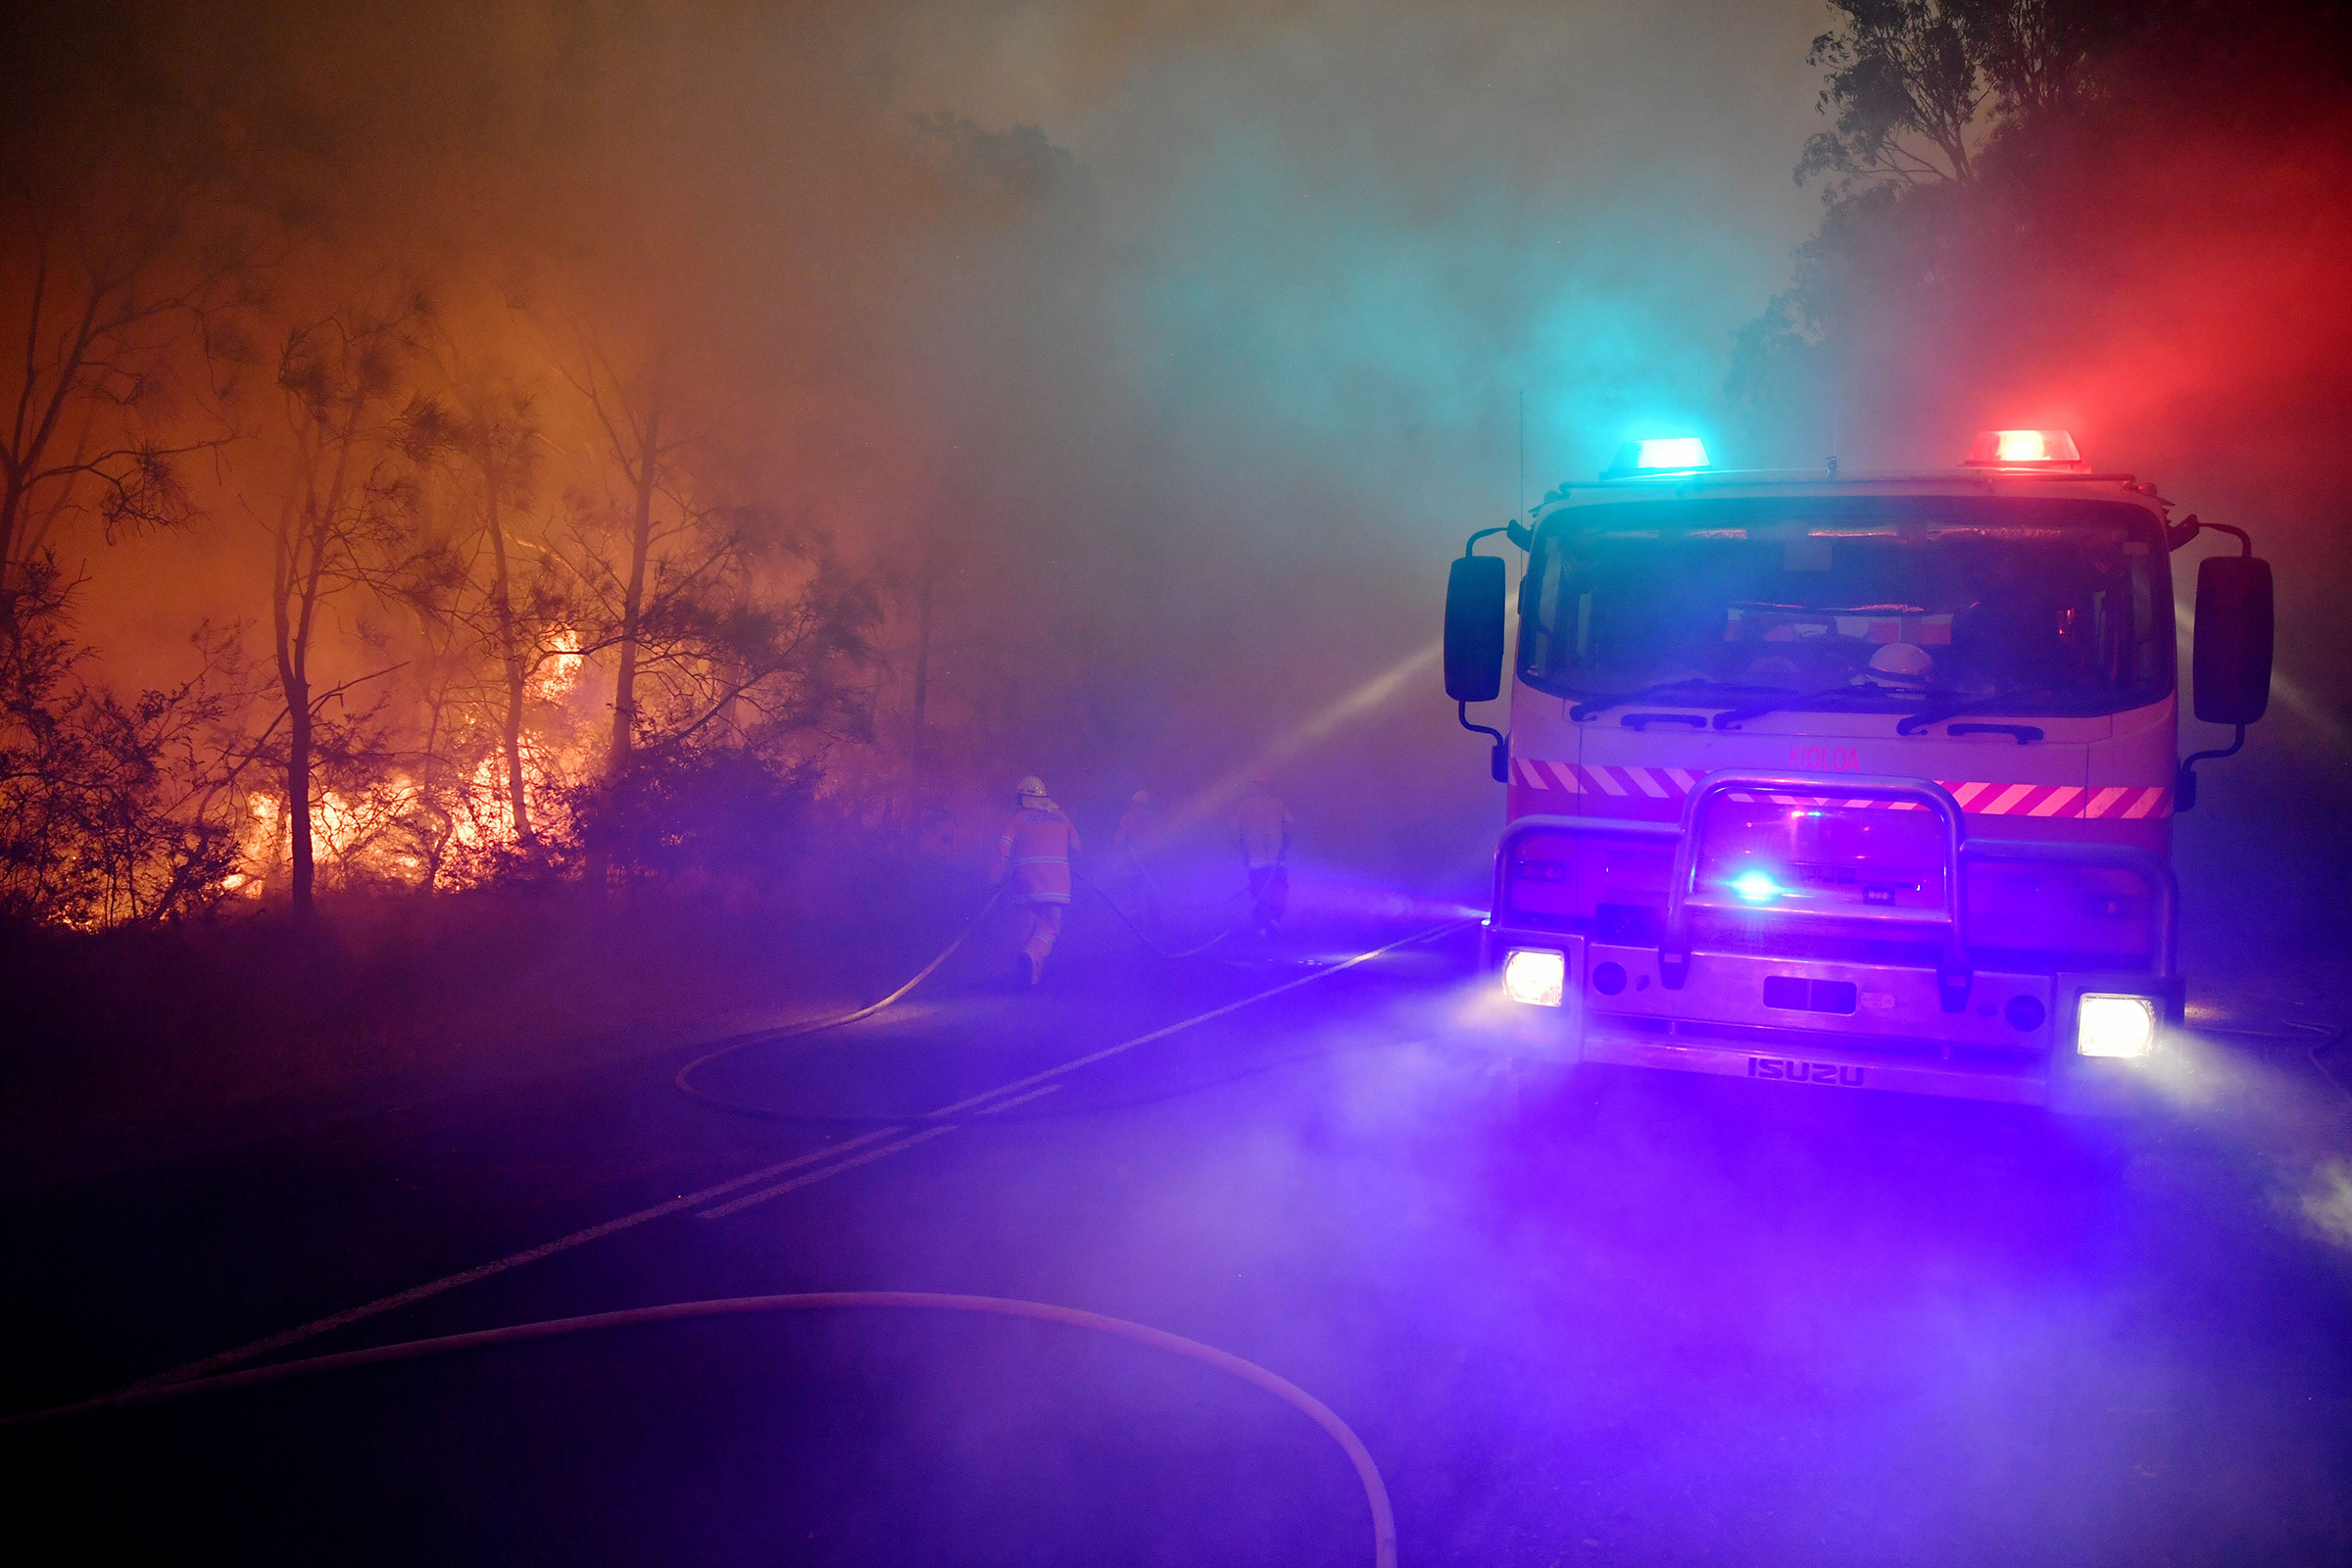 Fire and rescue officers try to contain a bushfire near Kioloa, New South Wales, on Dec. 3, 2019. (Dean Lewins—EPA-EFE/Shutterstock)